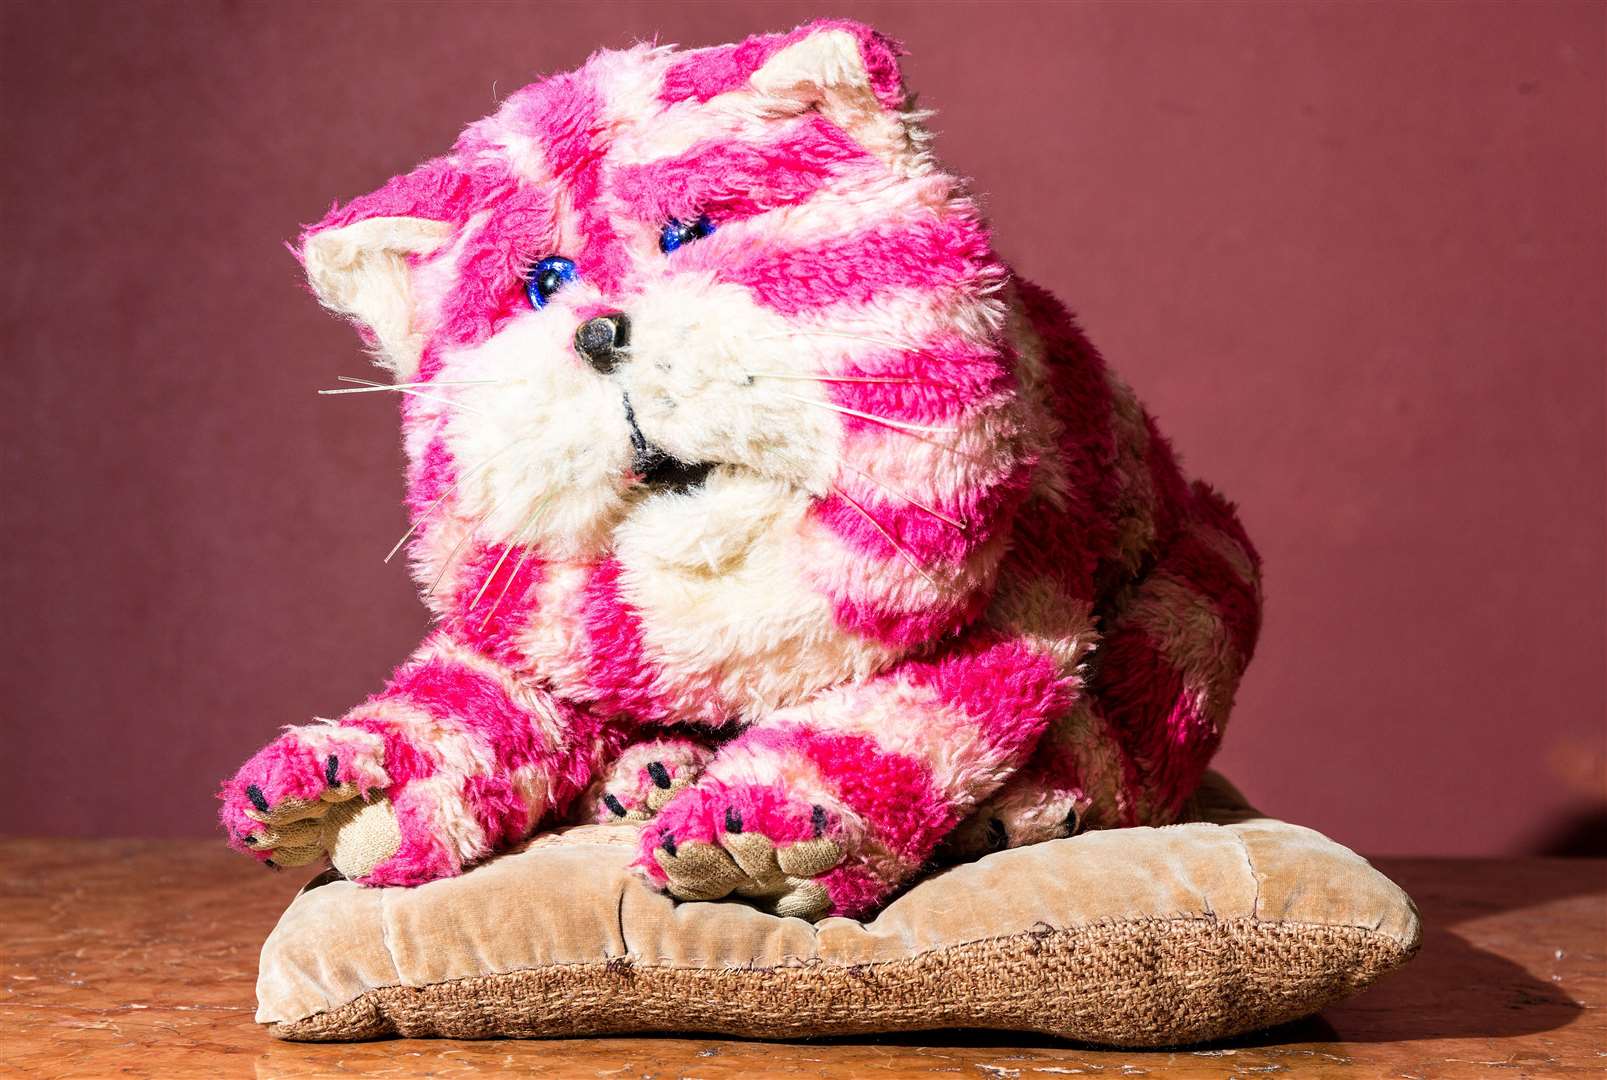 Bagpuss now lives at the Beaney in Canterbury. Picture: The Beaney